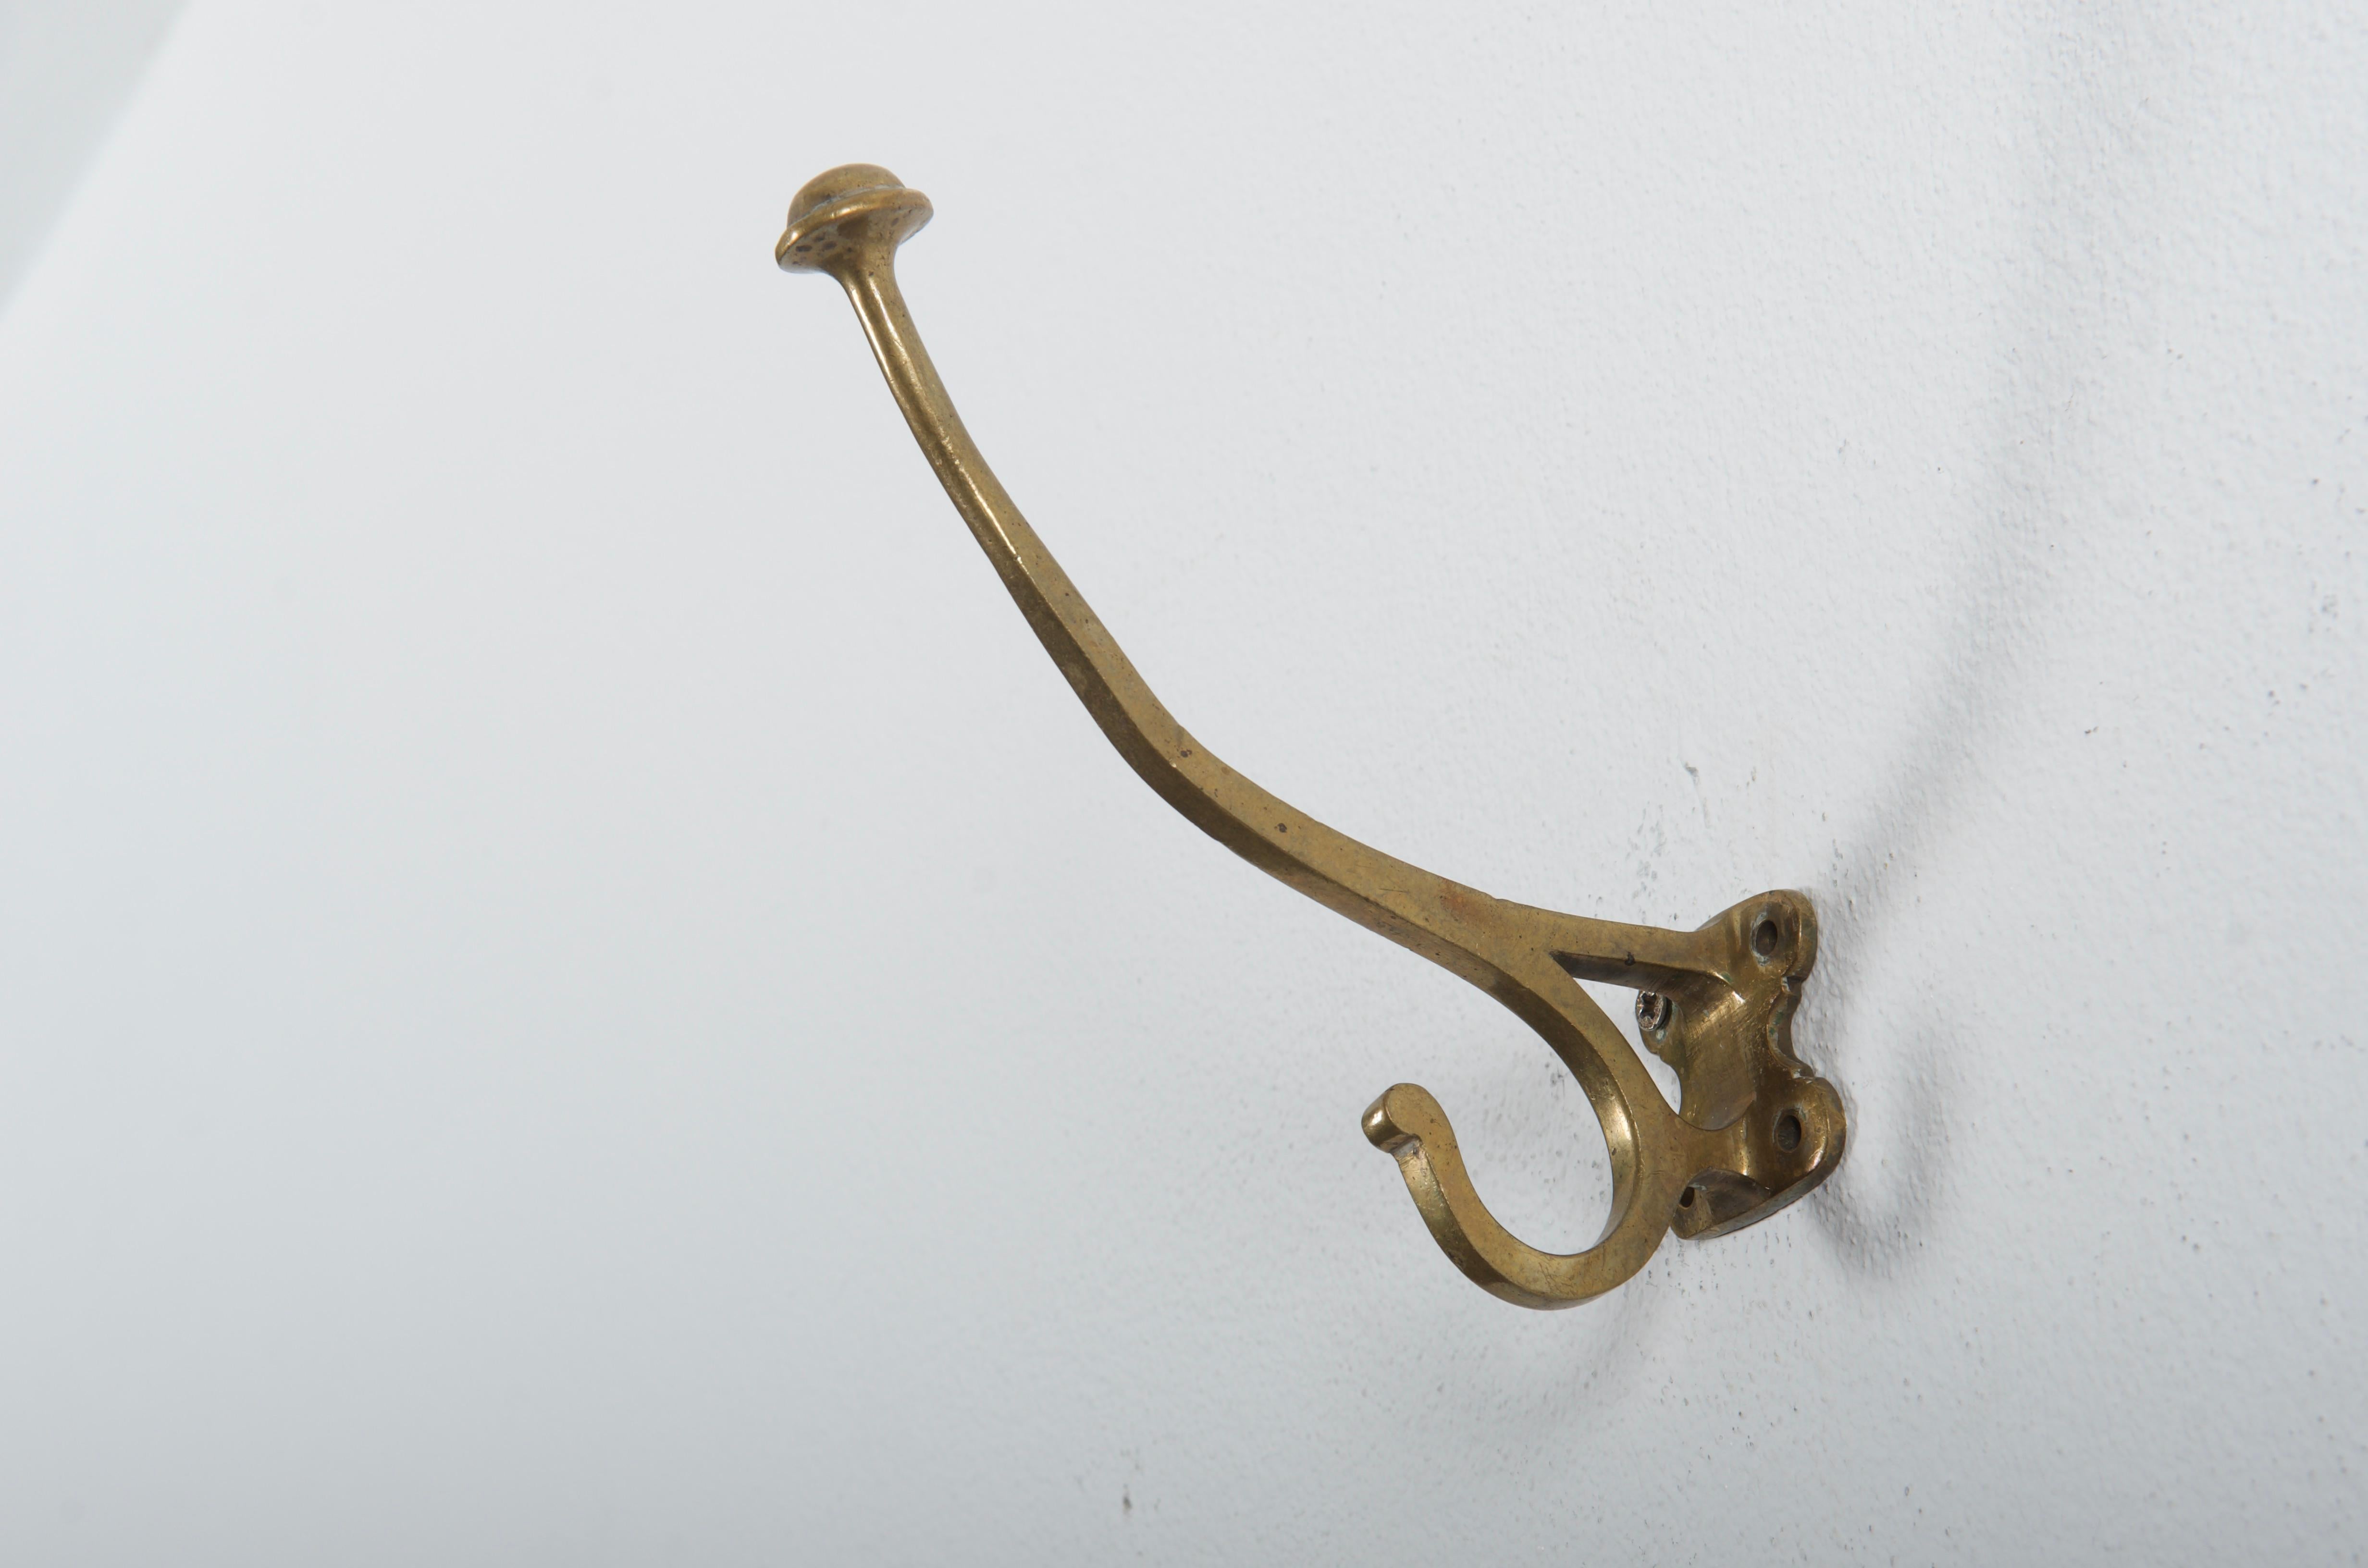 Cast brass made in Austria about 1900
up to three available